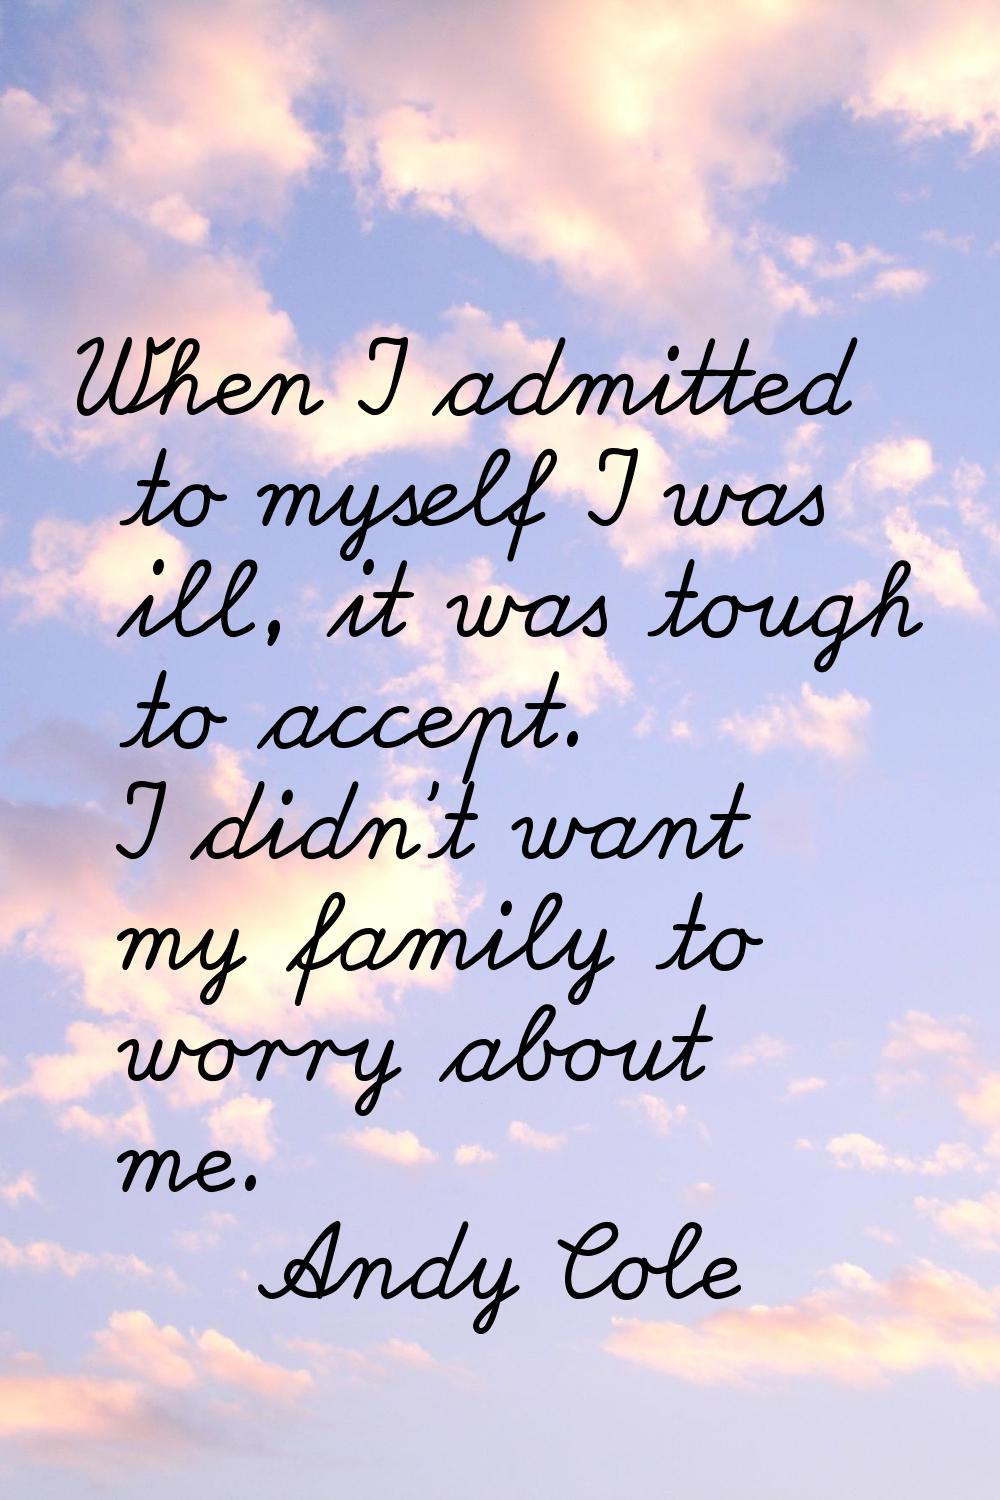 When I admitted to myself I was ill, it was tough to accept. I didn't want my family to worry about